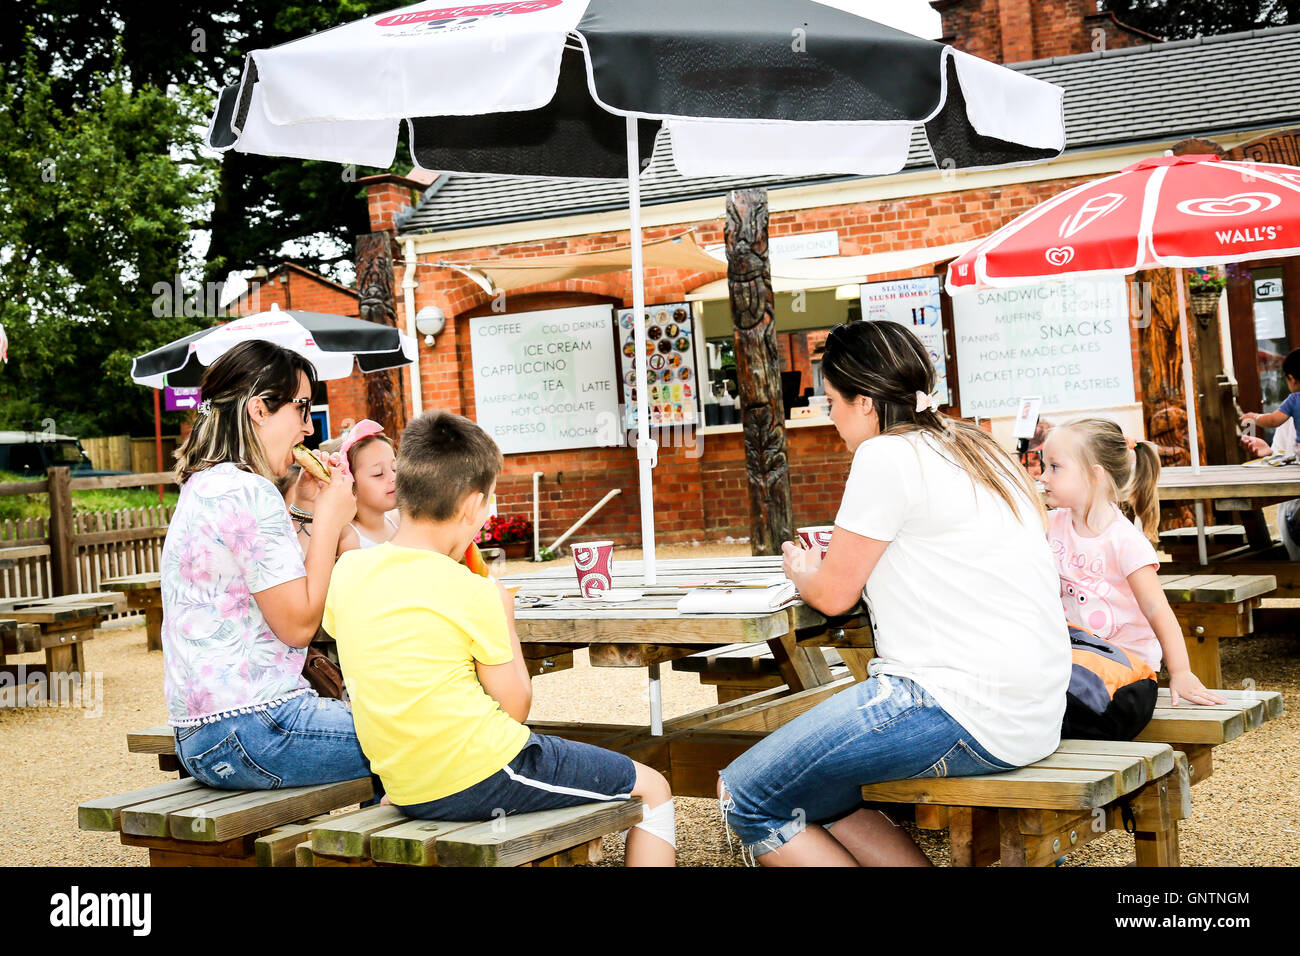 A young family enjoying a snack at an outdoor cafe in the summer Stock Photo